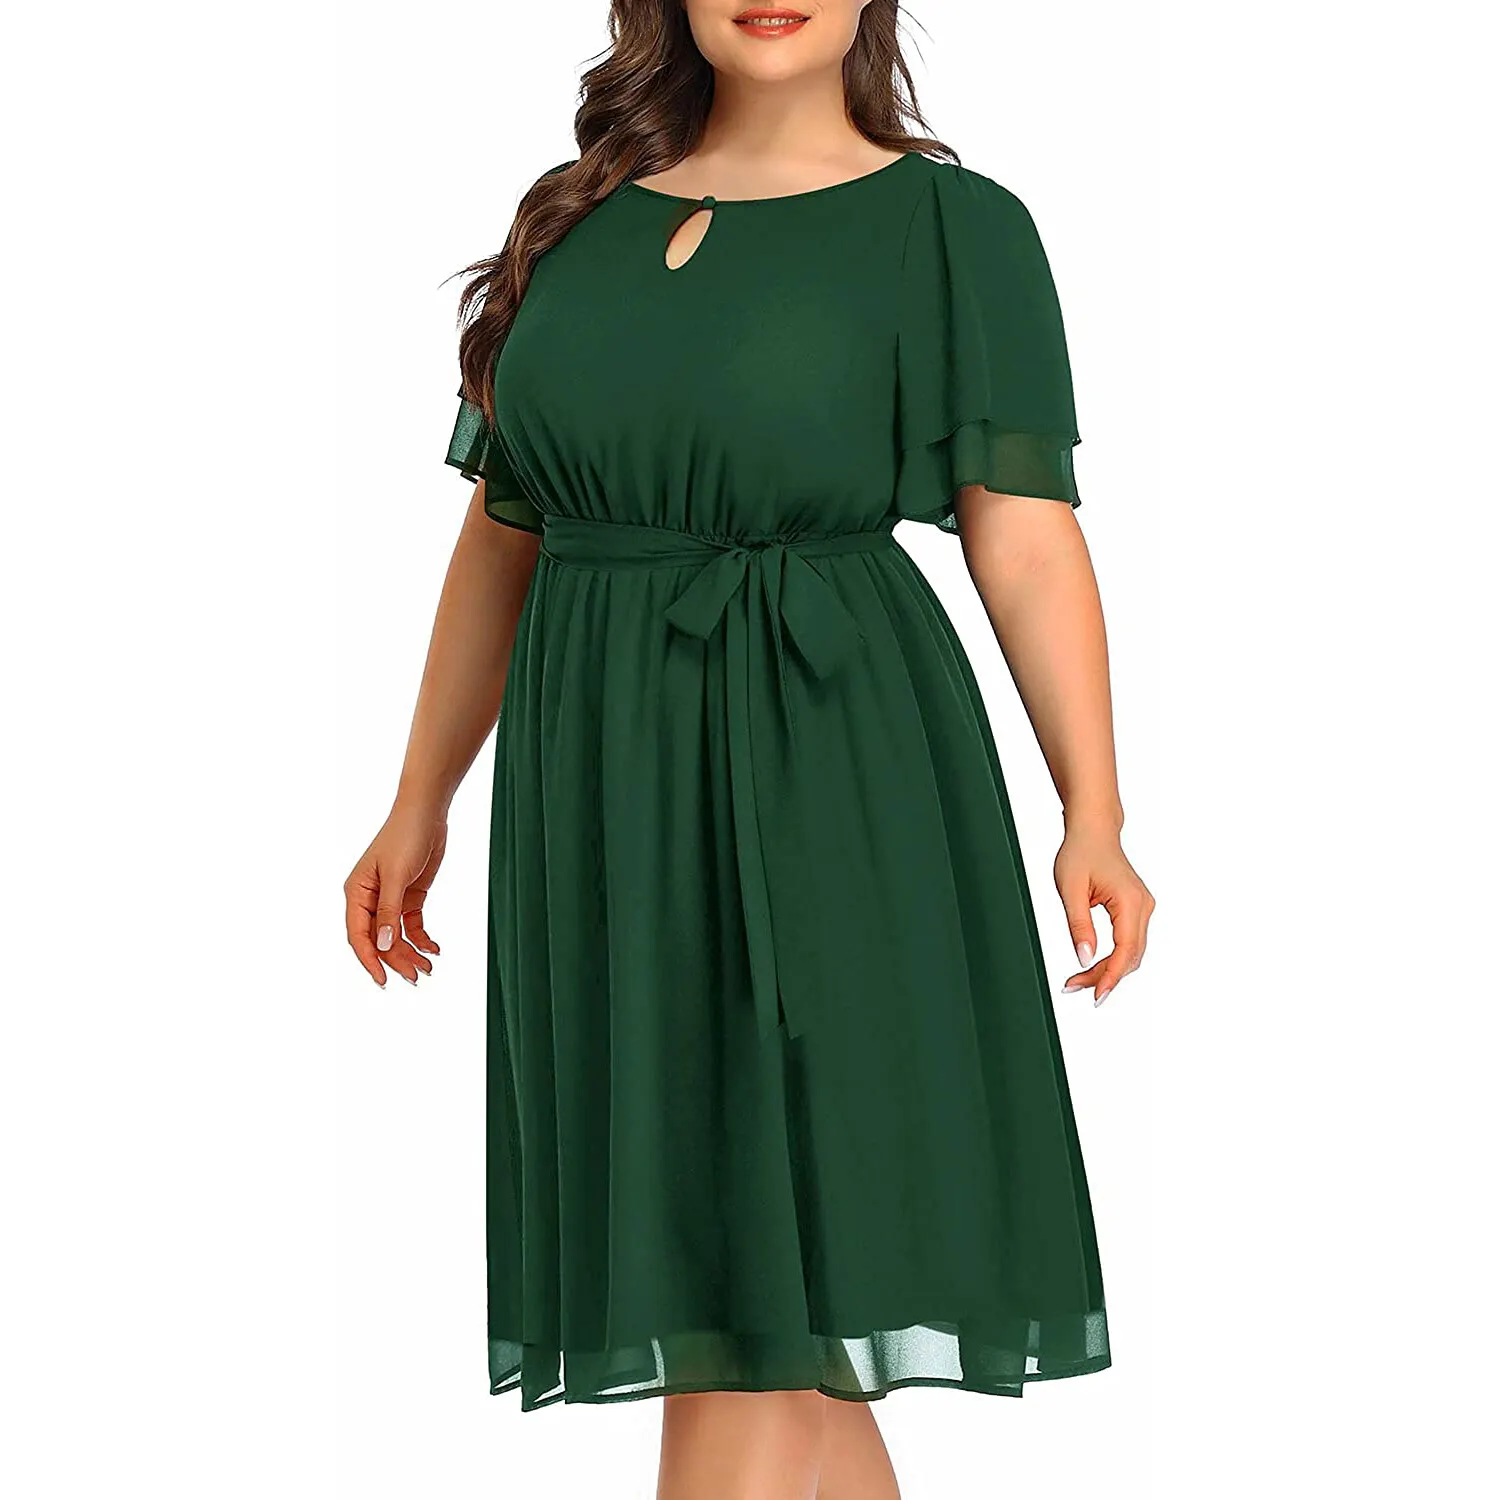 Formal Plus Size Women Clothing Classic Elegant Casual Chiffon Summer Short Sleeve Dinner Cocktail Party Midi Dress For Lady